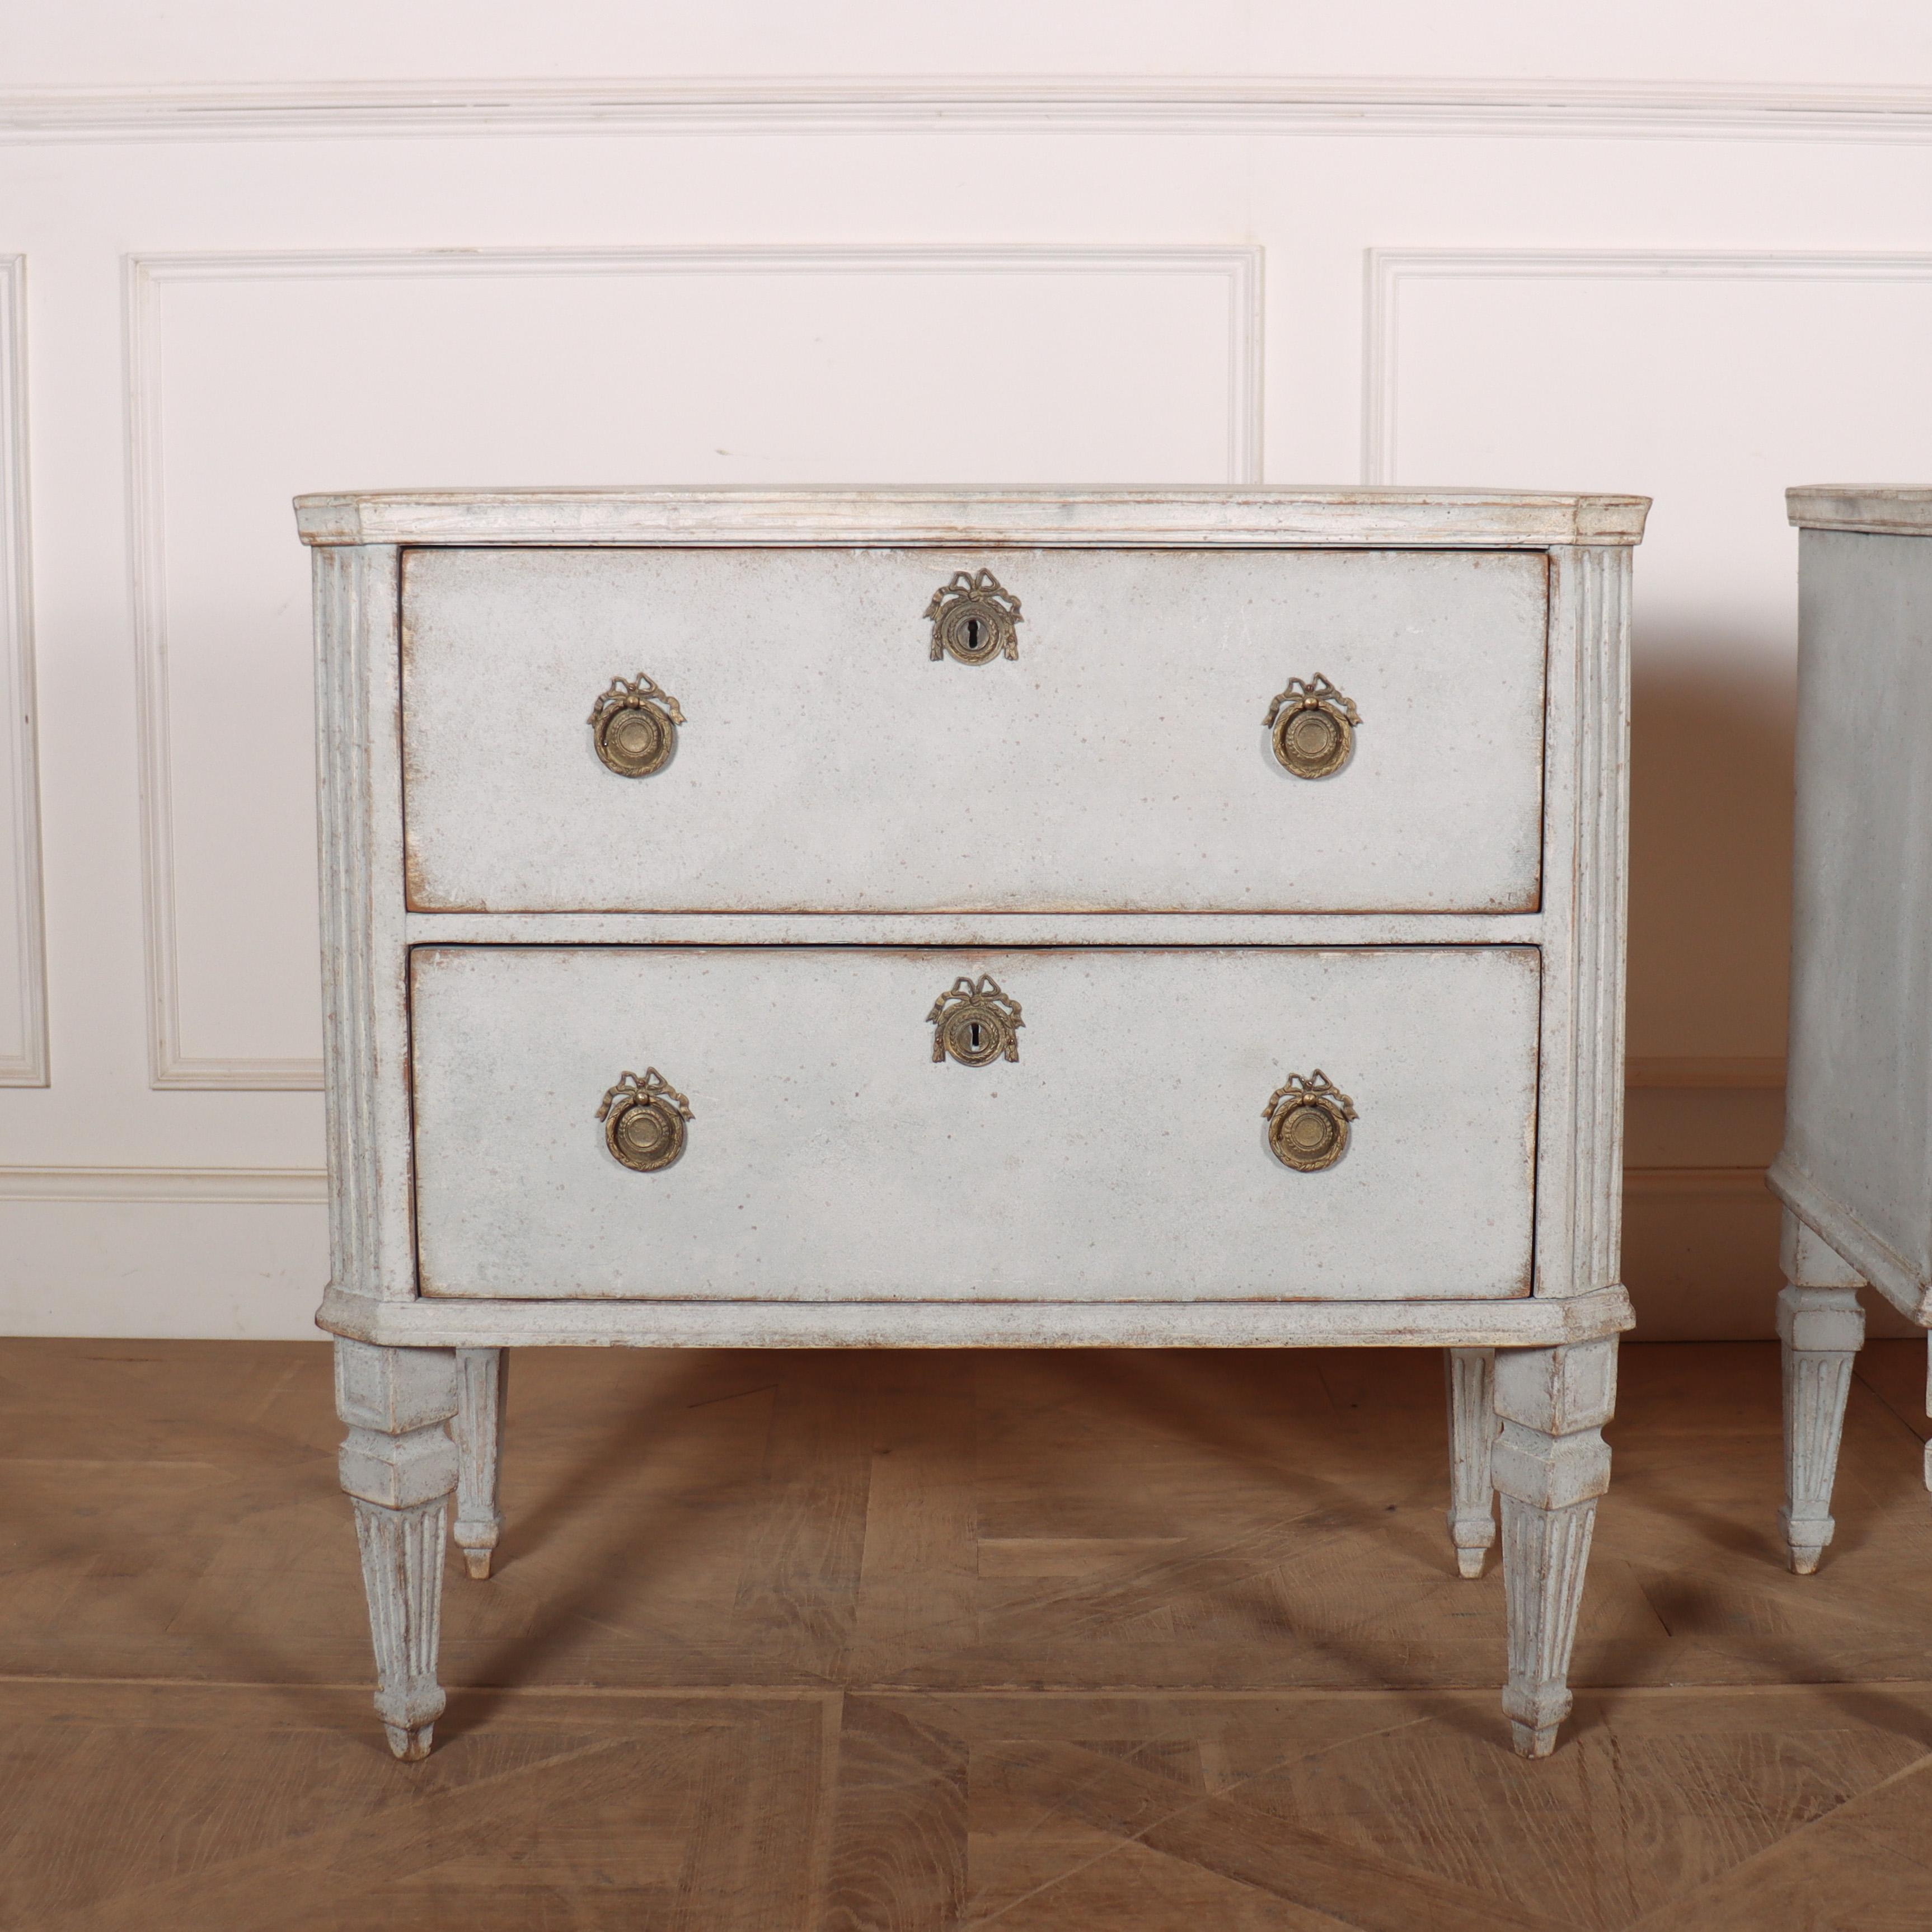 Pair of Swedish Painted Commodes In Good Condition For Sale In Leamington Spa, Warwickshire